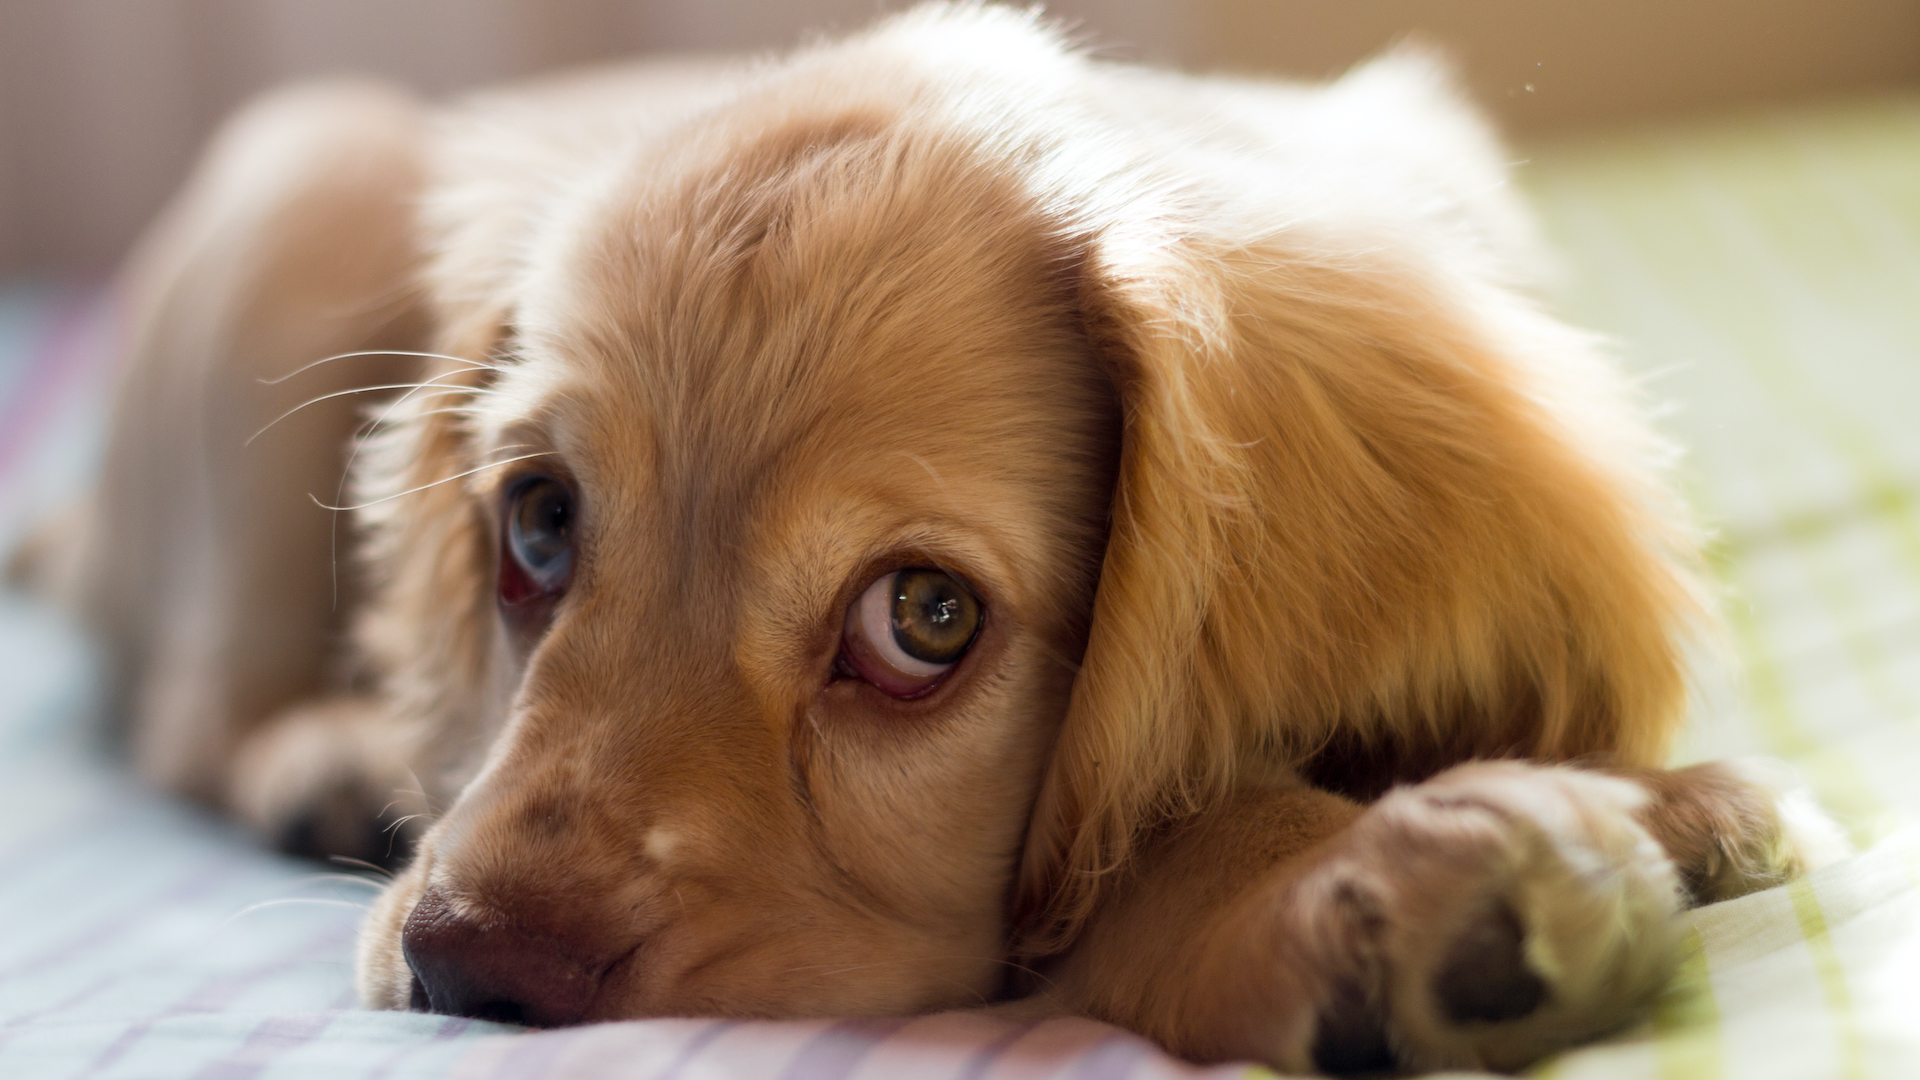 A doe-eyed puppy lies on a bed looking up at the camera